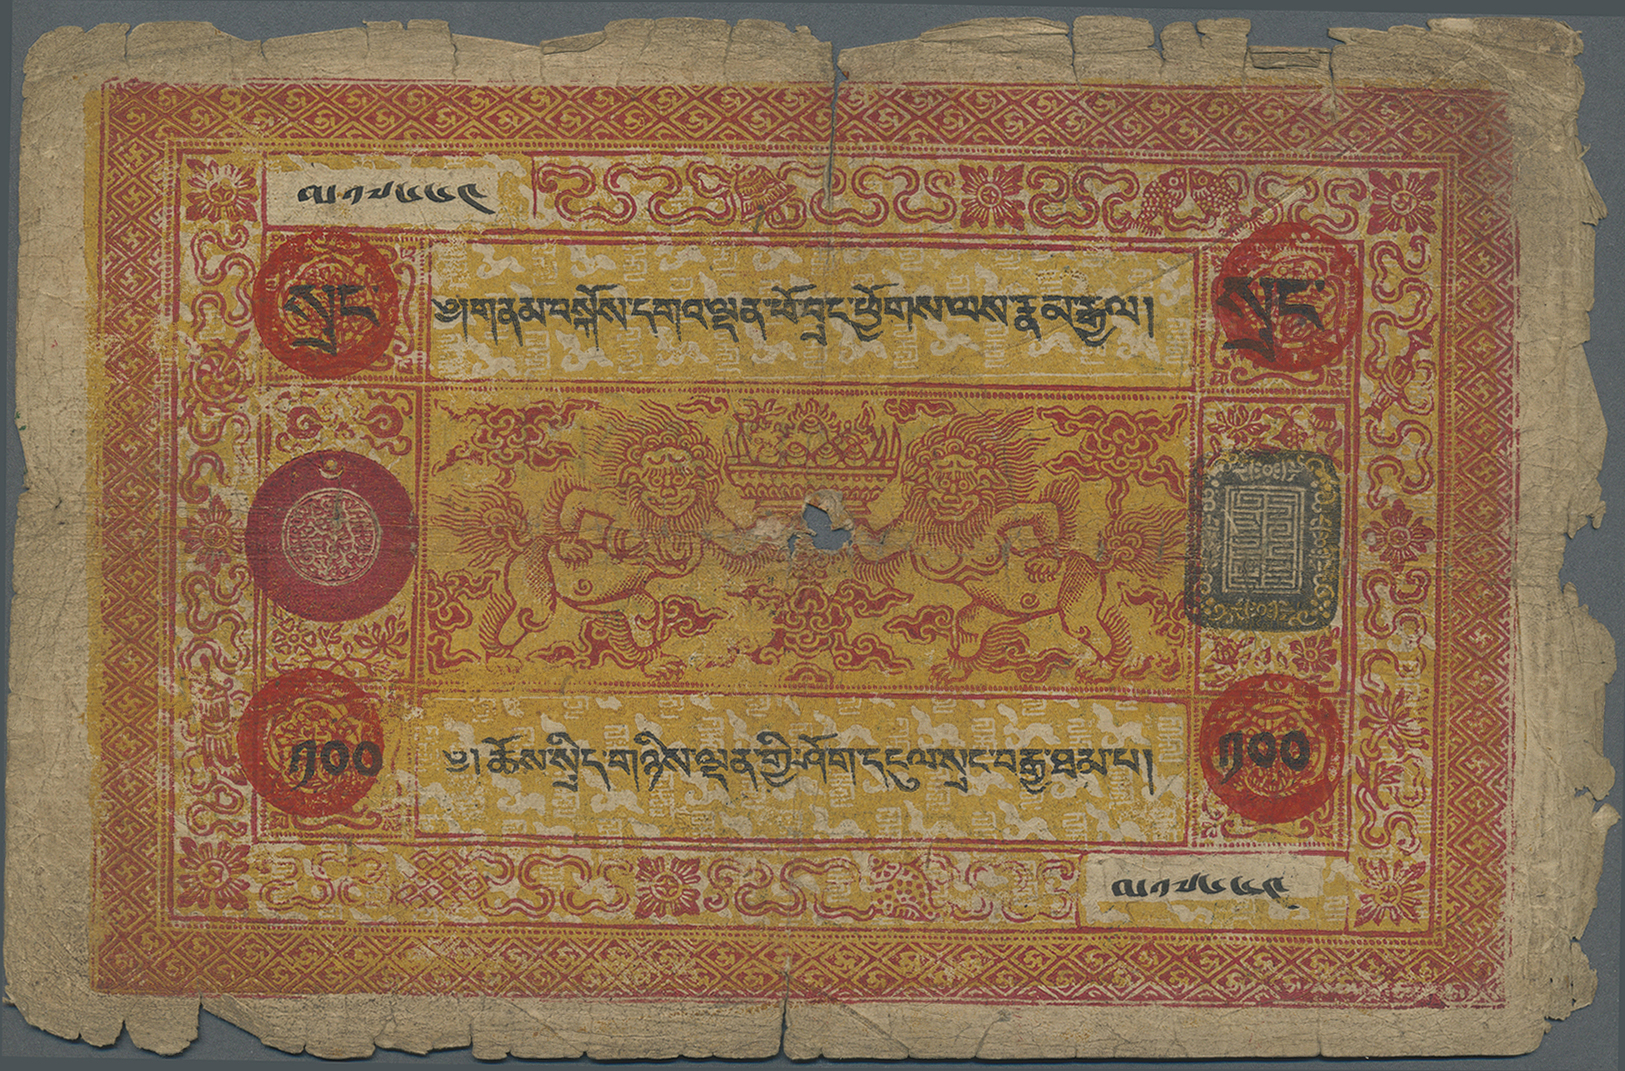 03103 Tibet: 100 Srang ND SPECIMEN P. 11s, With 4 Red Specimen Seals On Front, Borders Worn, Strong Folds, Center Hole, - Autres - Asie